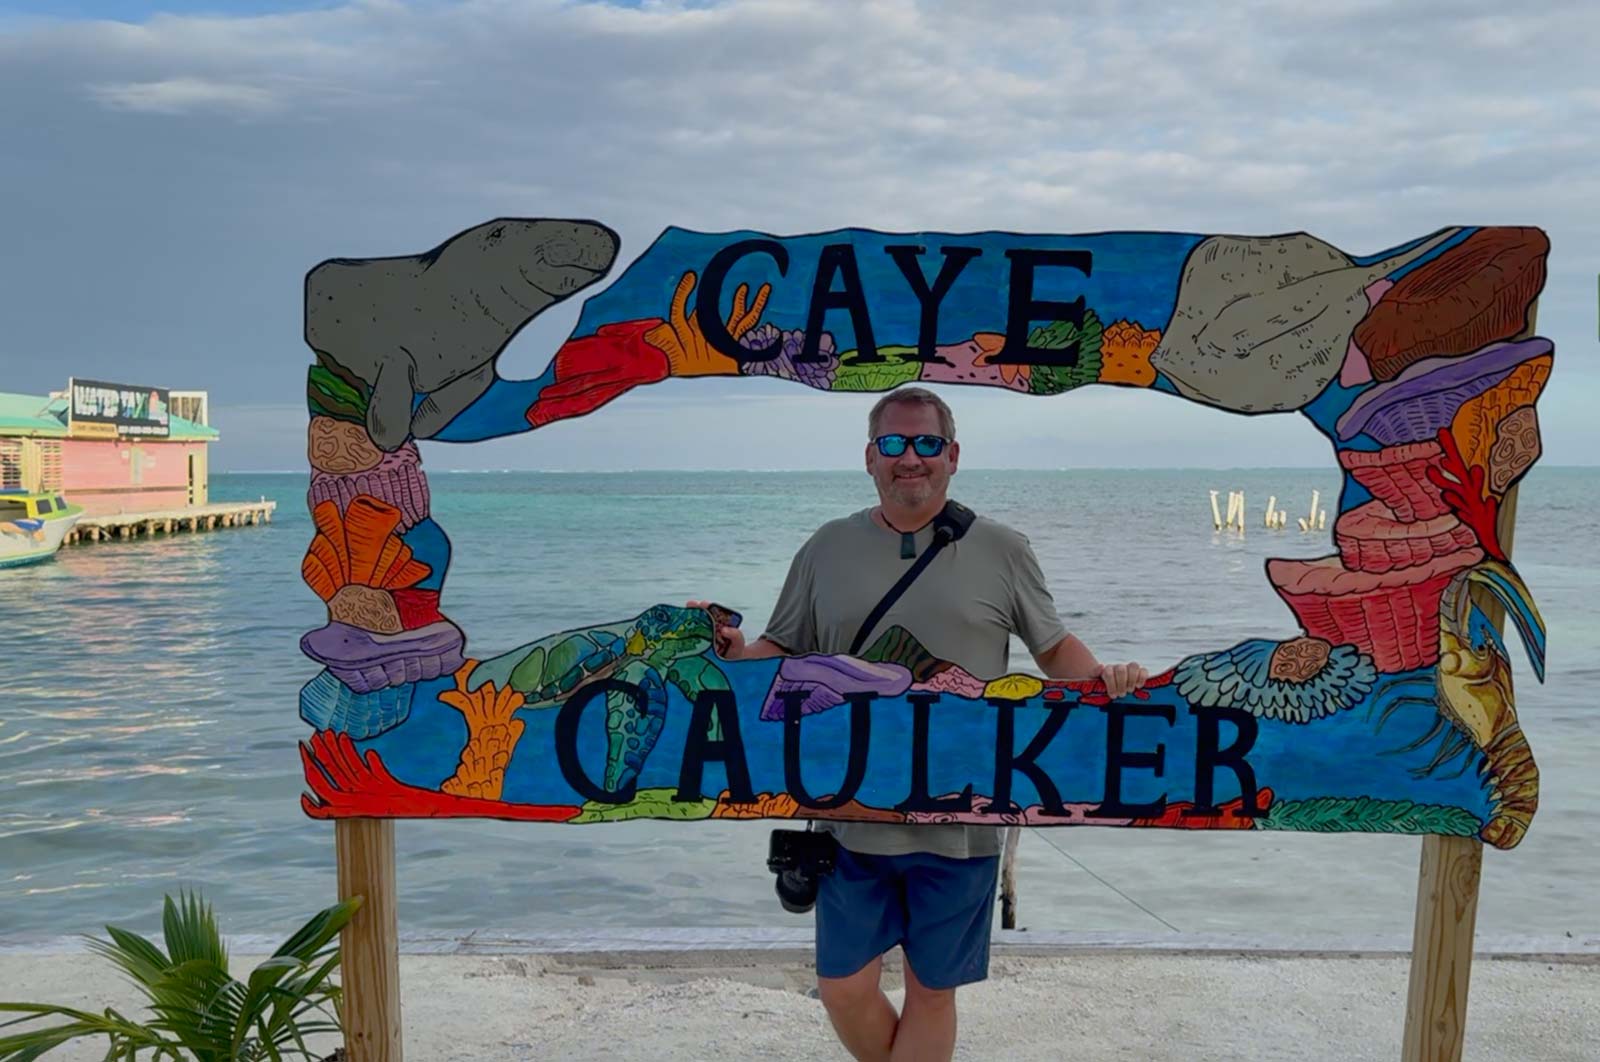 things to do in caye caulker sign 2